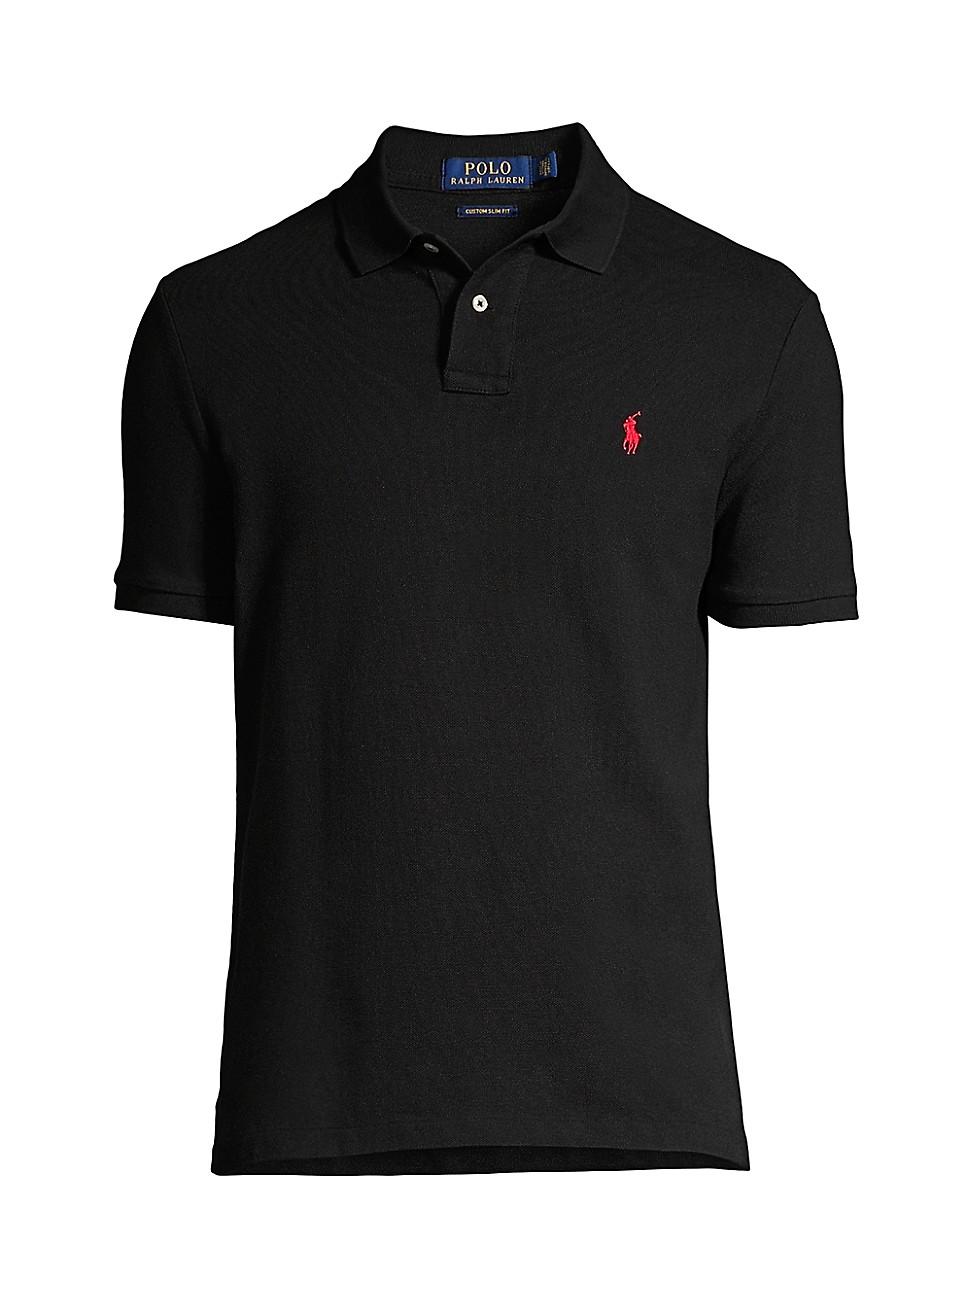 Polo Ralph Lauren The Iconic Mesh Polo Shirt in Black for Men | Lyst